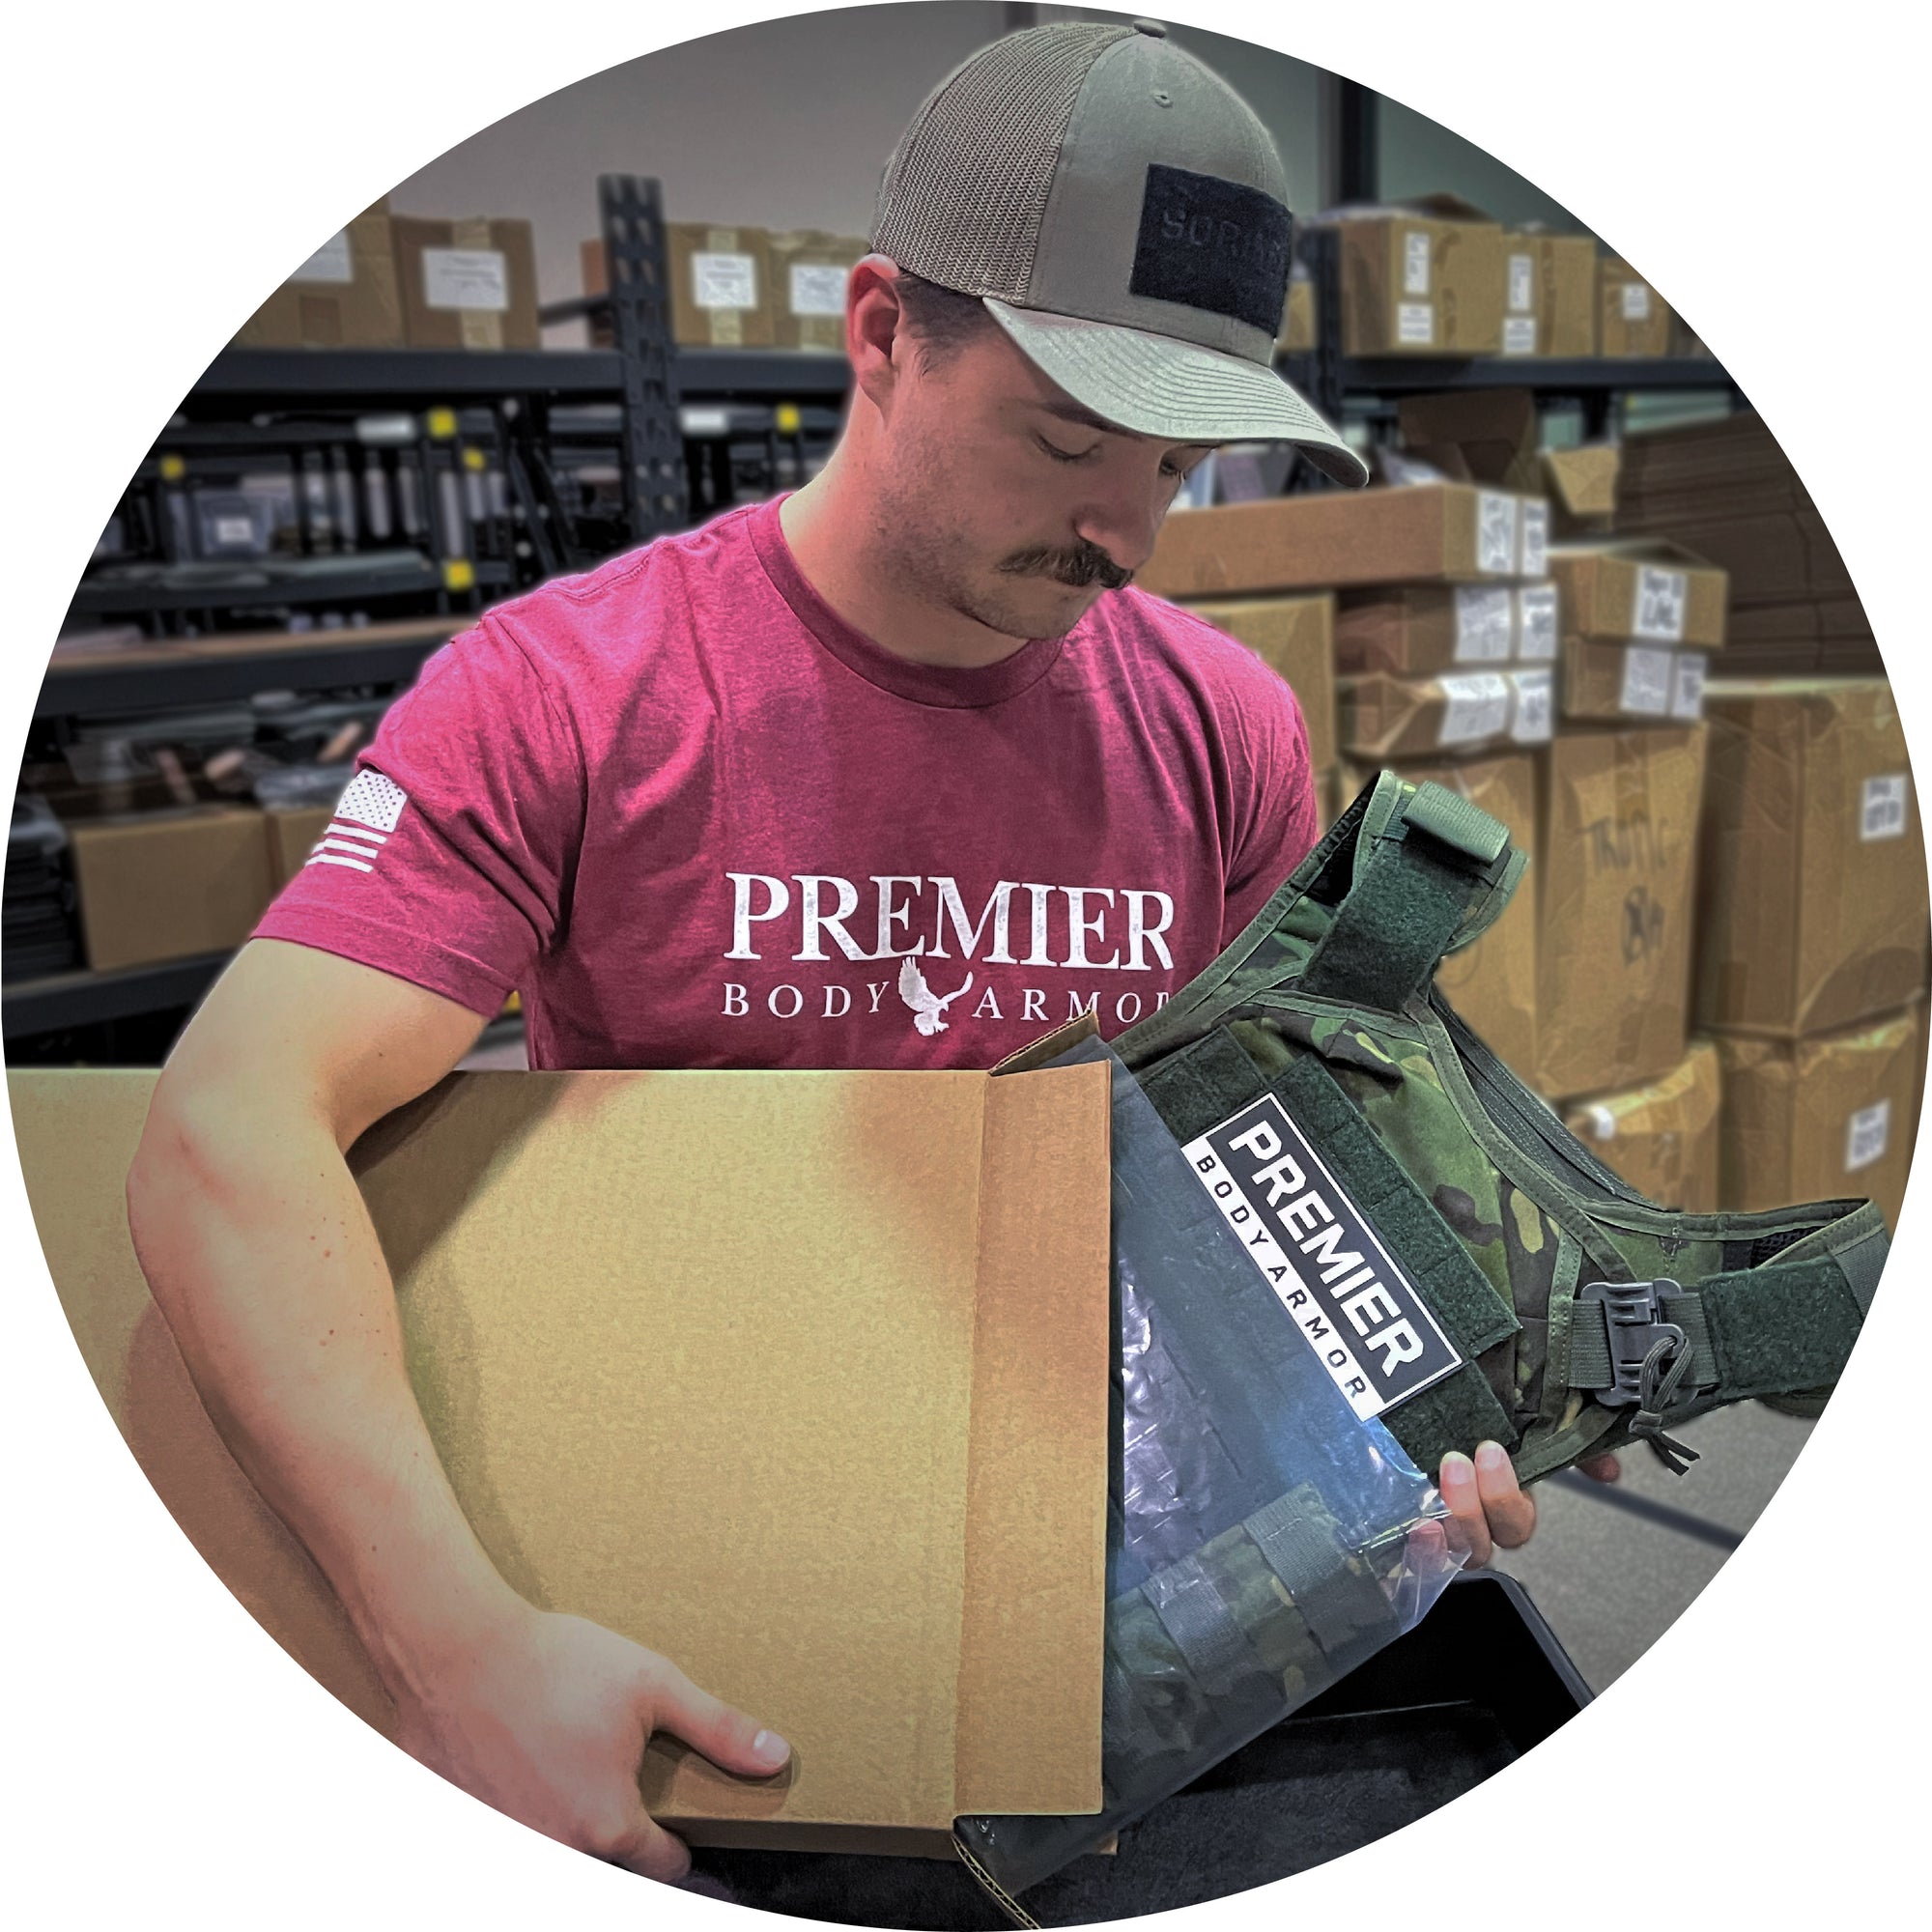 Image of our fulfillment center. Premier Body Armor offers unmatched lead times for all our products. We keep laptop cases, carrier plates, and bullet proof vests in stock to ship immediately. Shop the best body armor for all your needs.